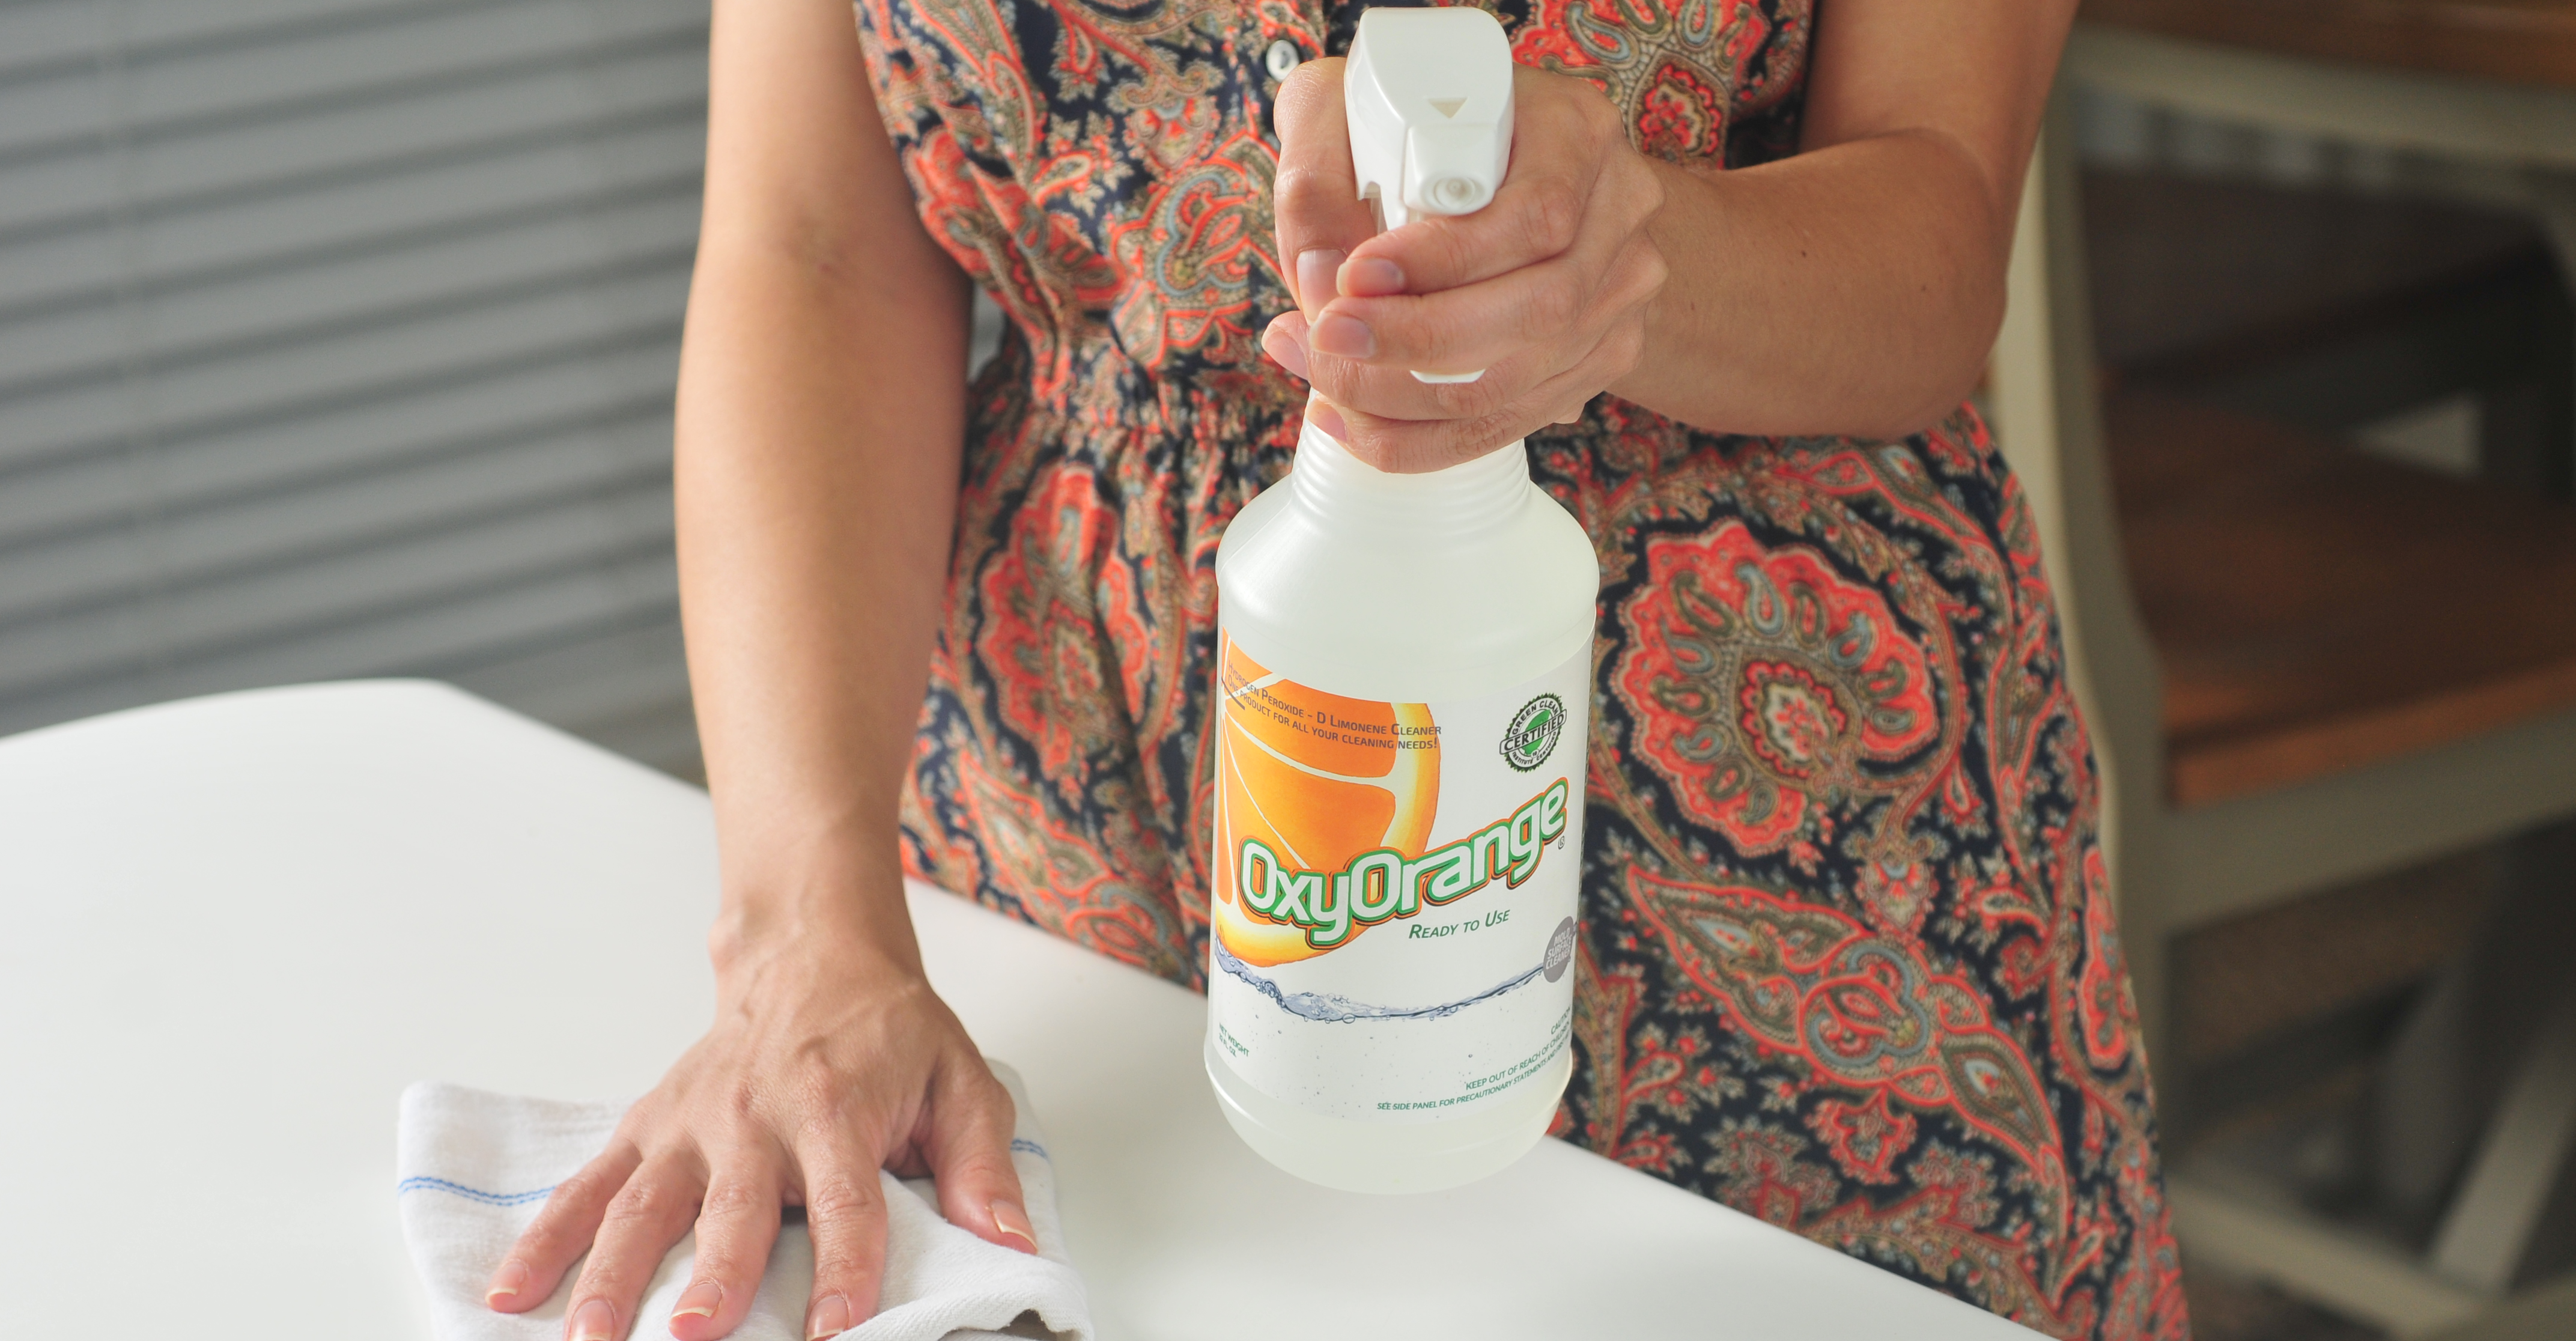 Oxy Orange® effectively removes a wide variety of common soils and stains, including coffee, tea, juice, grease, ink, red wine, and blood, while also neutralizing unpleasant odors